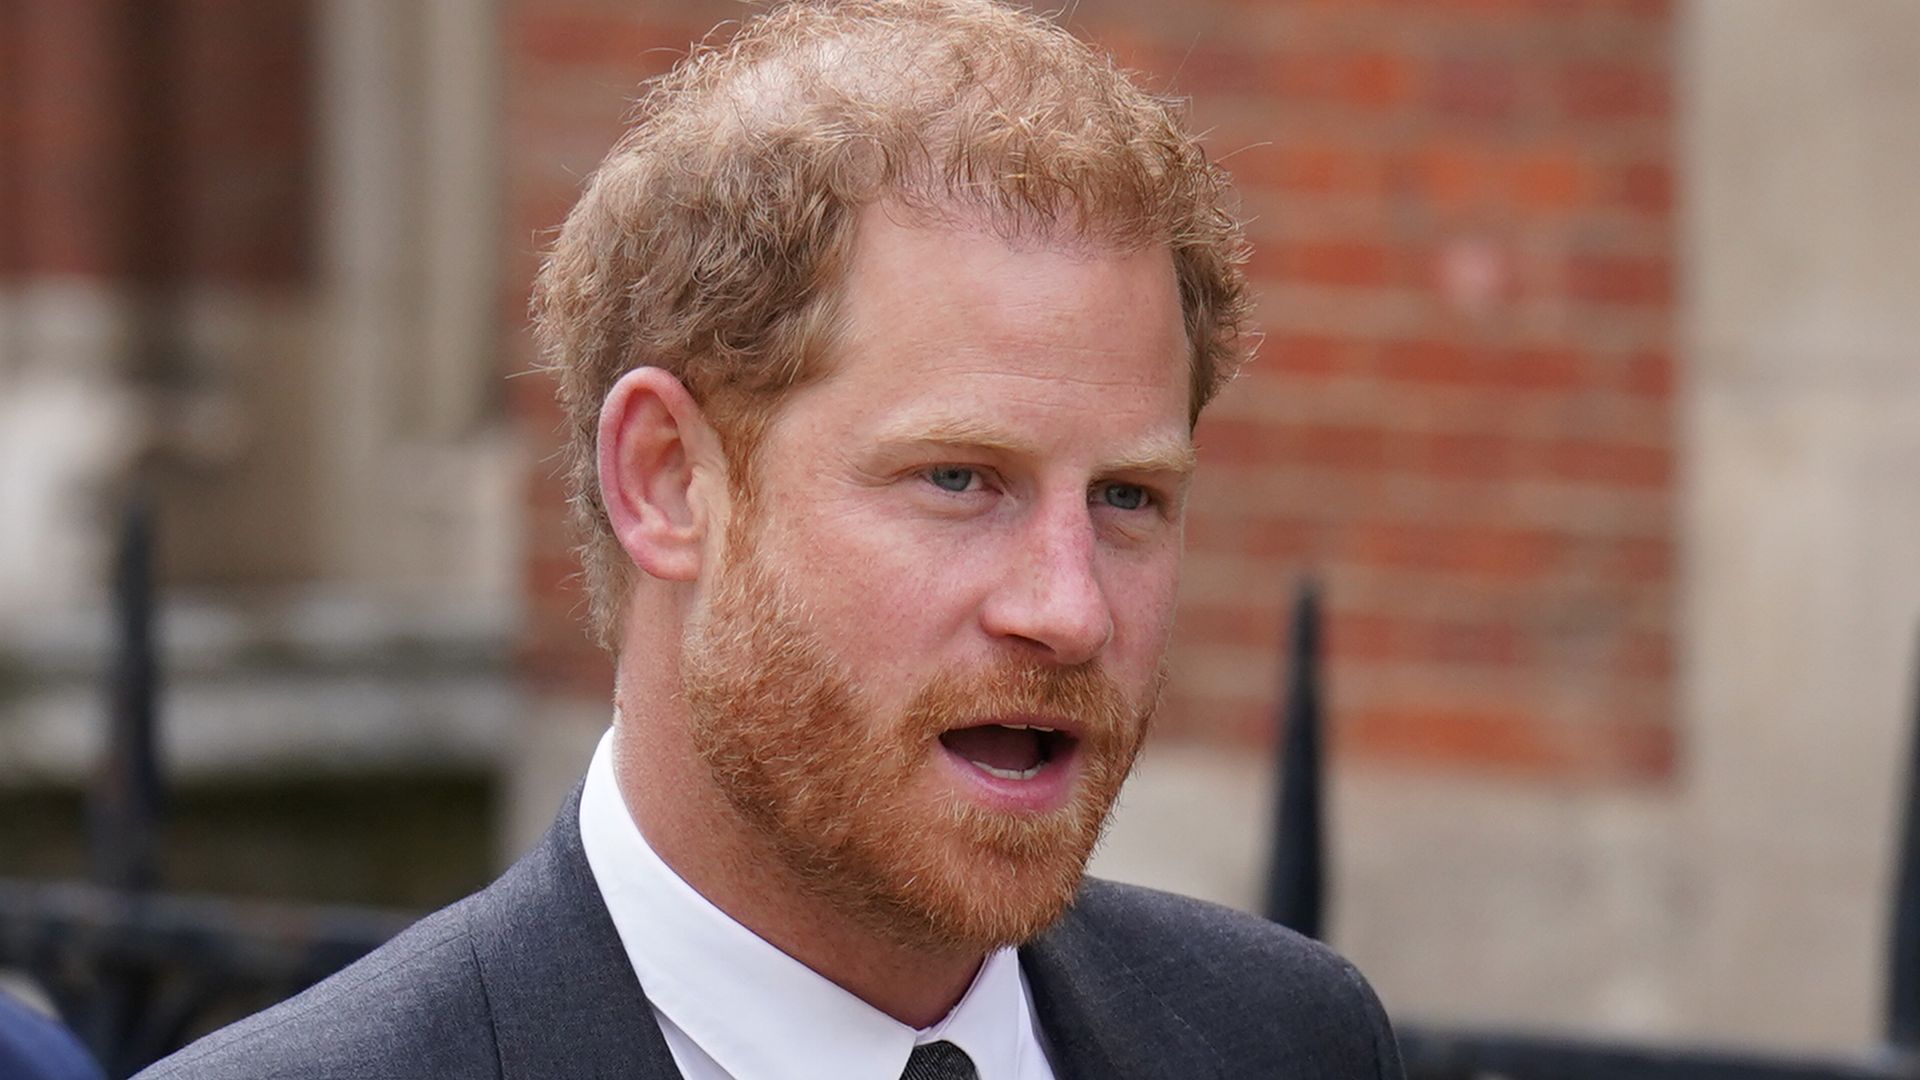 Prince Harry looking serious in a suit